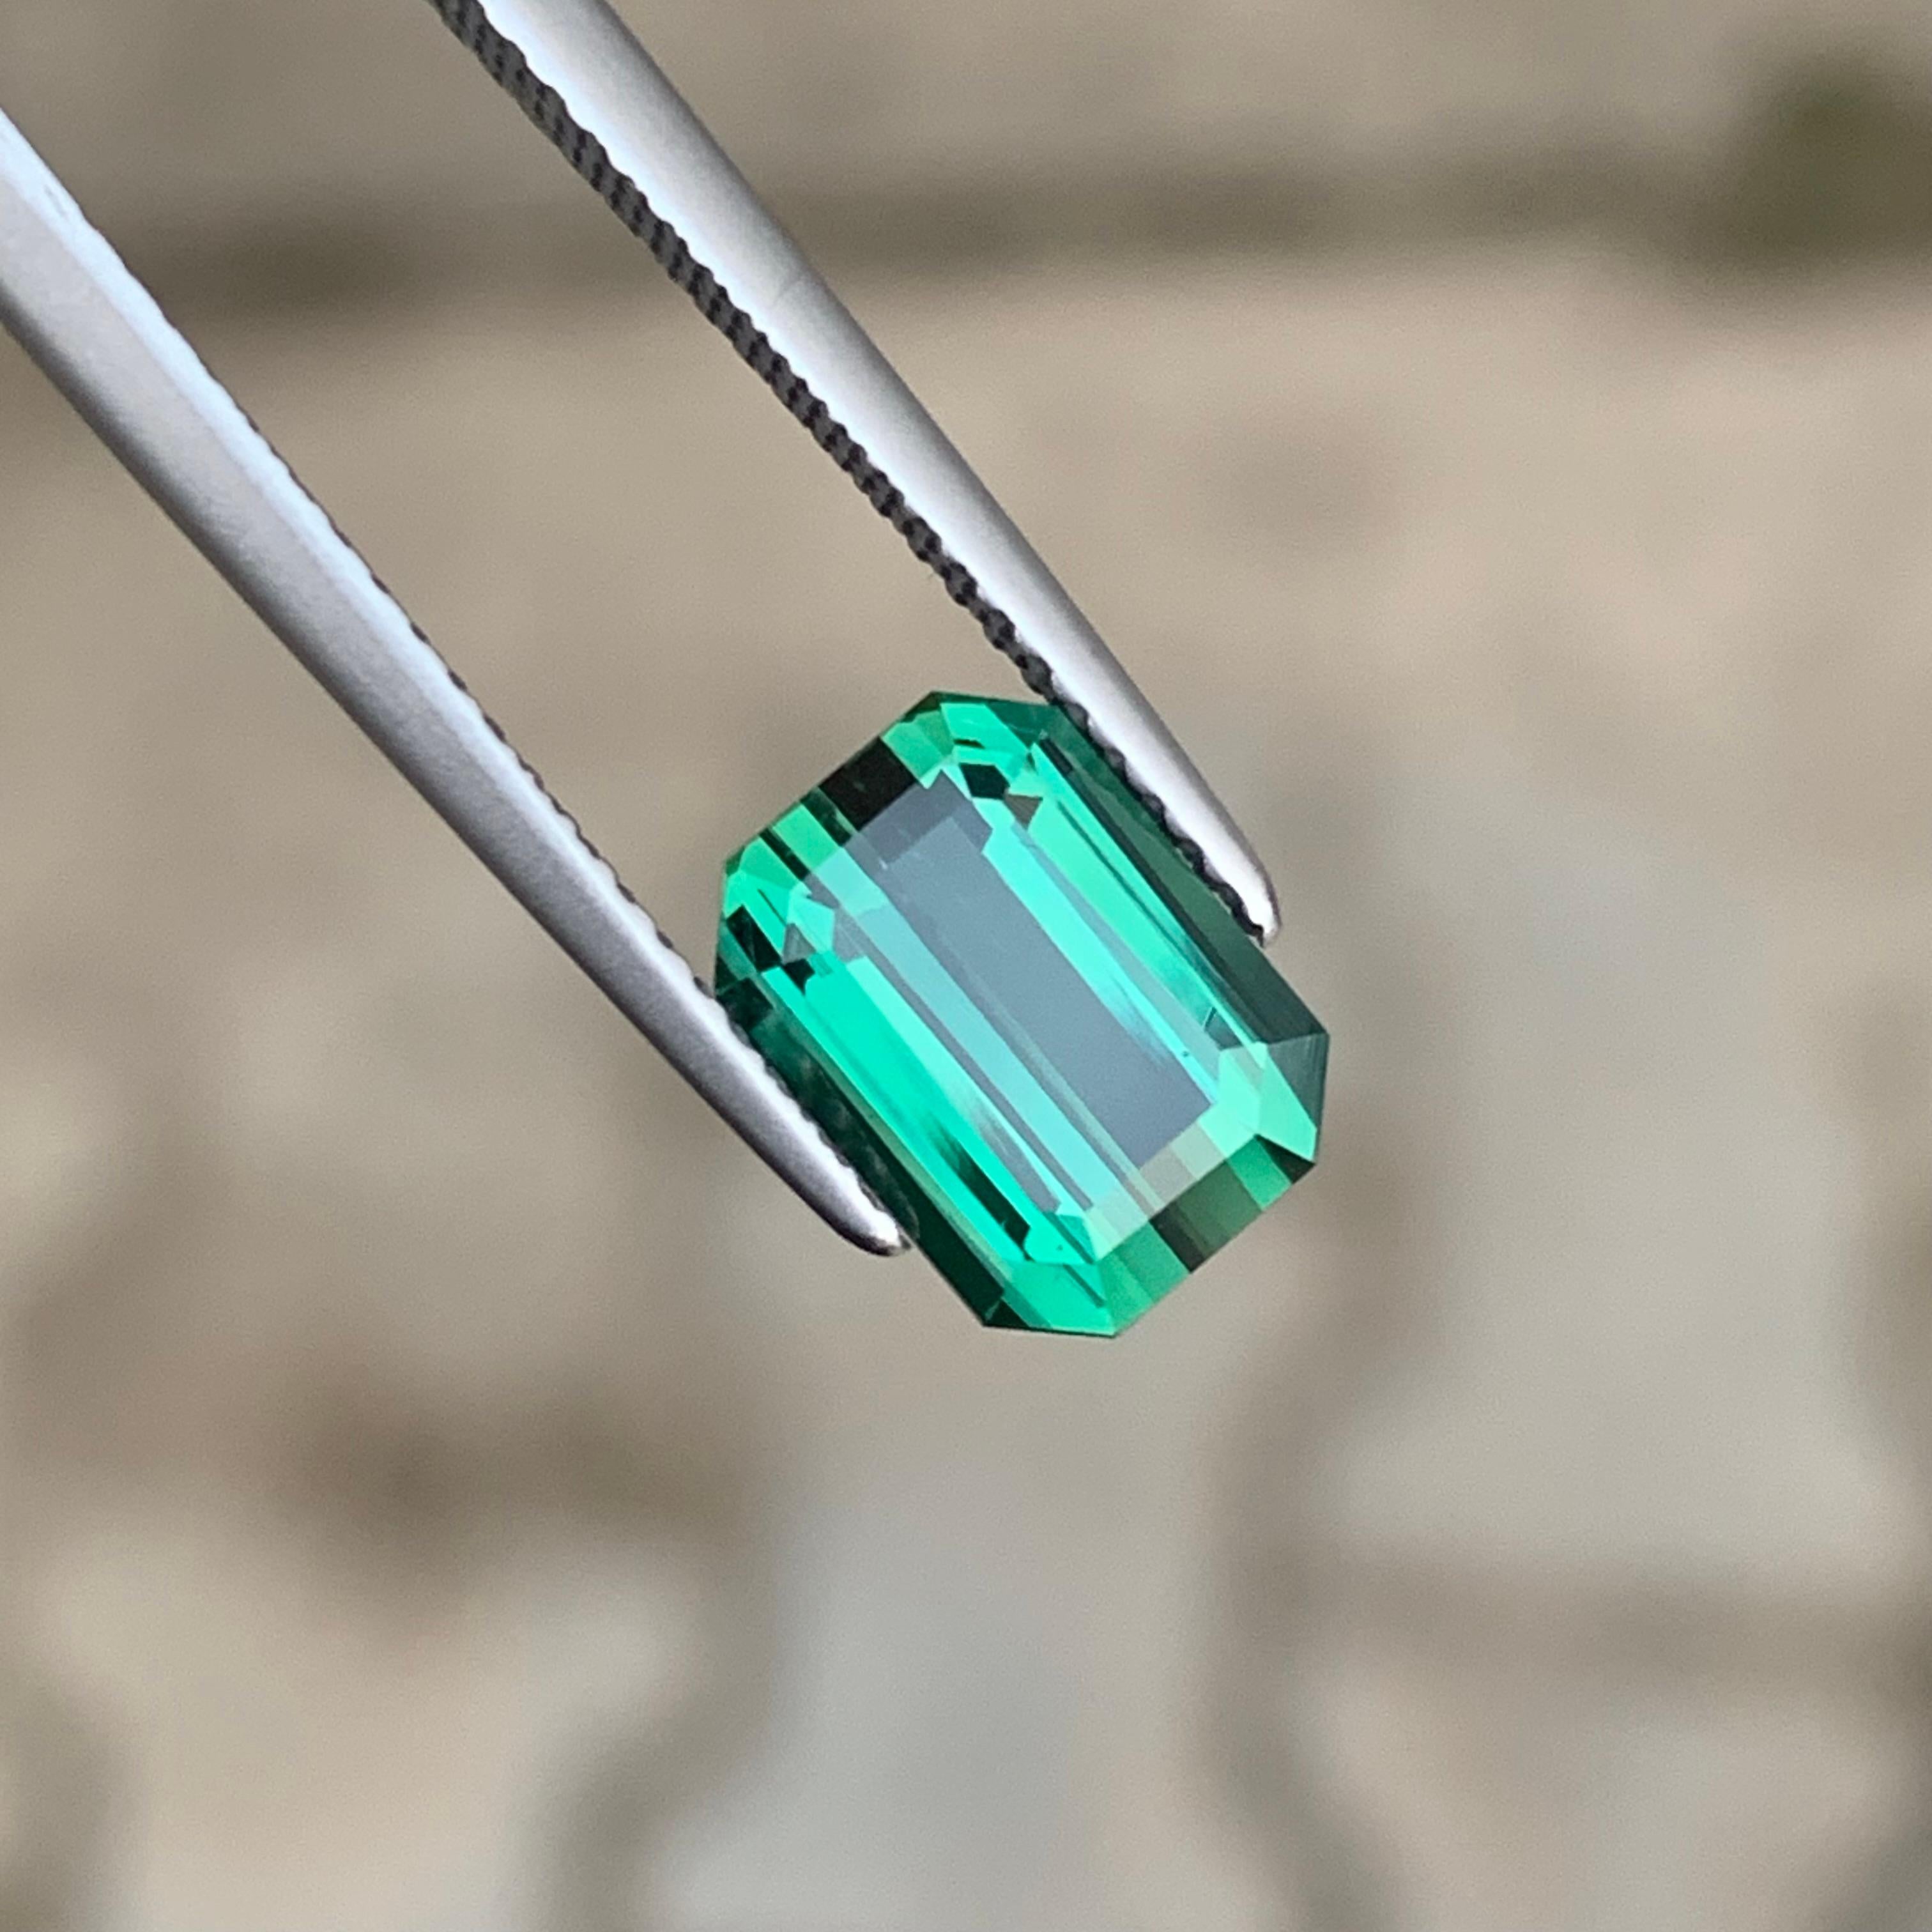 Faceted Lagoon Tourmaline
Weight: 2.20 Carats
Dimension: 8.9x6.6x4.4 Mm
Origin: Afghanistan
Color: Green Blue / Lagoon 
Shape: Emerald 
Clarity: Clean Eye Clean
Certificate: On Demand
Treatment: Non / Natural
Tourmaline is a strongly dichroic